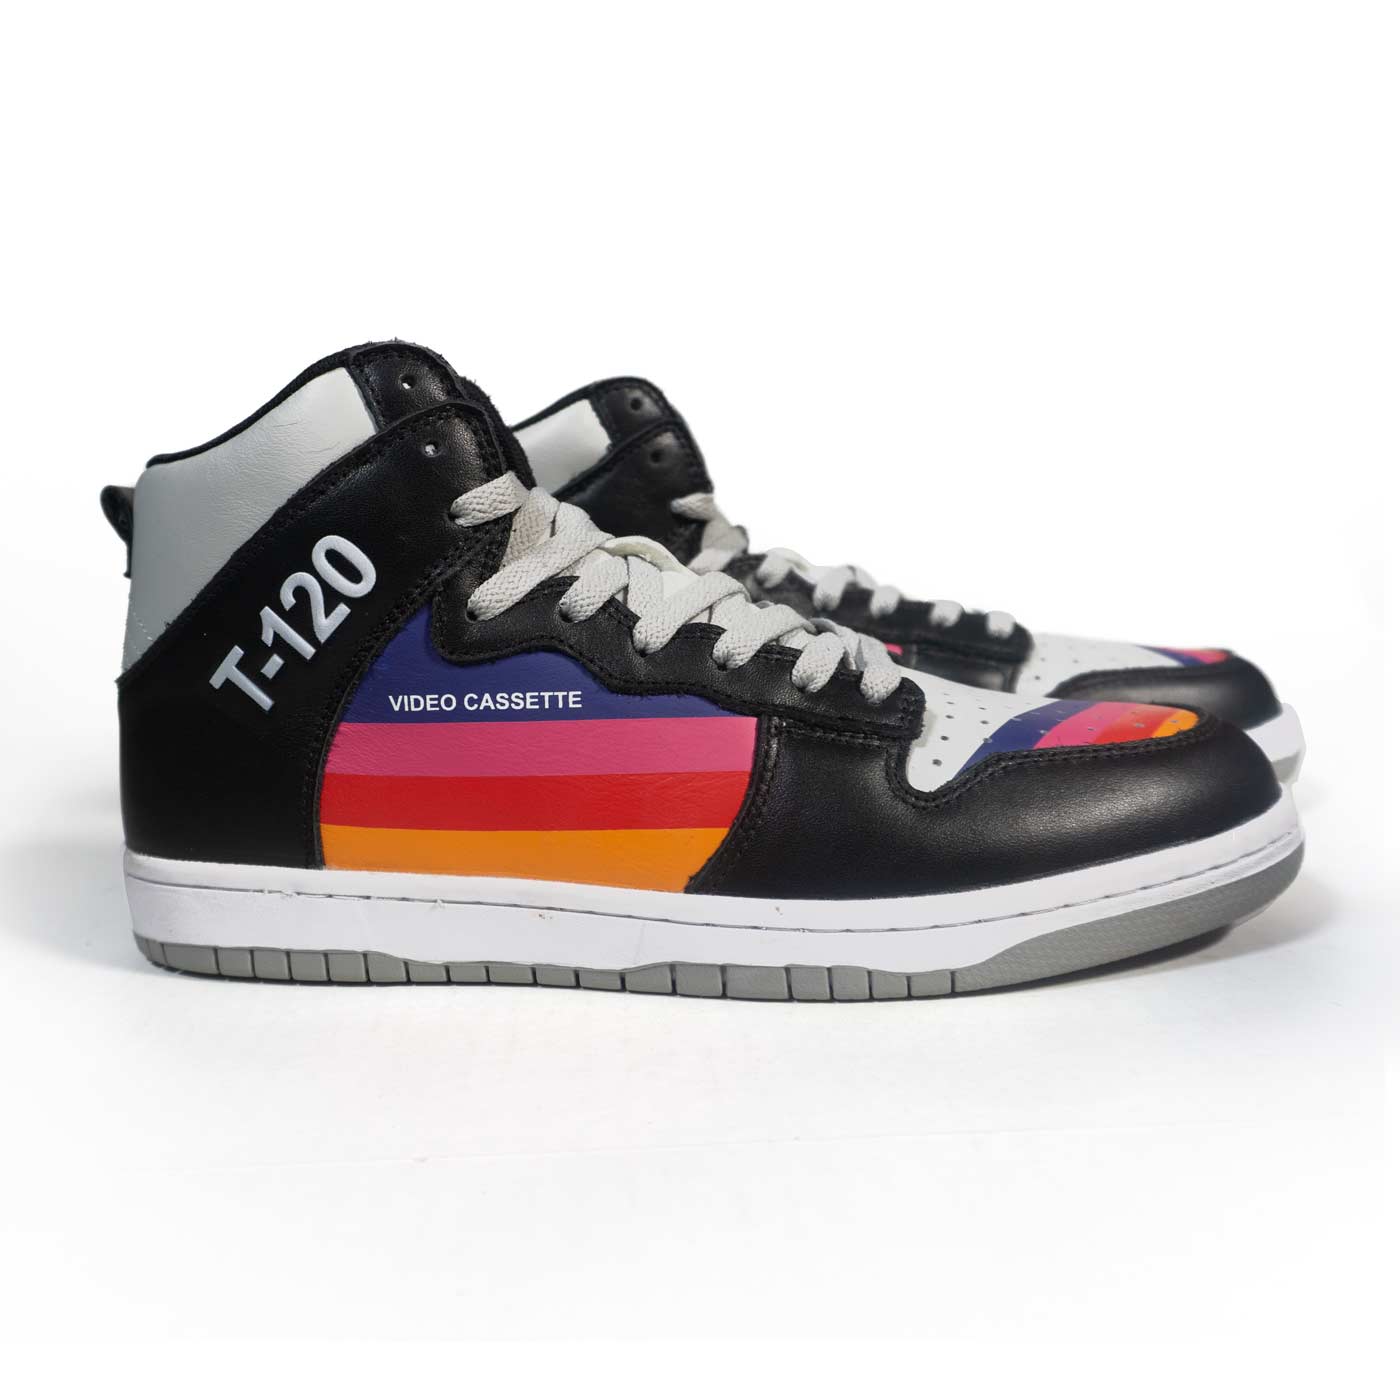 VHS Tape Shoes - Nostalgic T-120 VHS sneakers